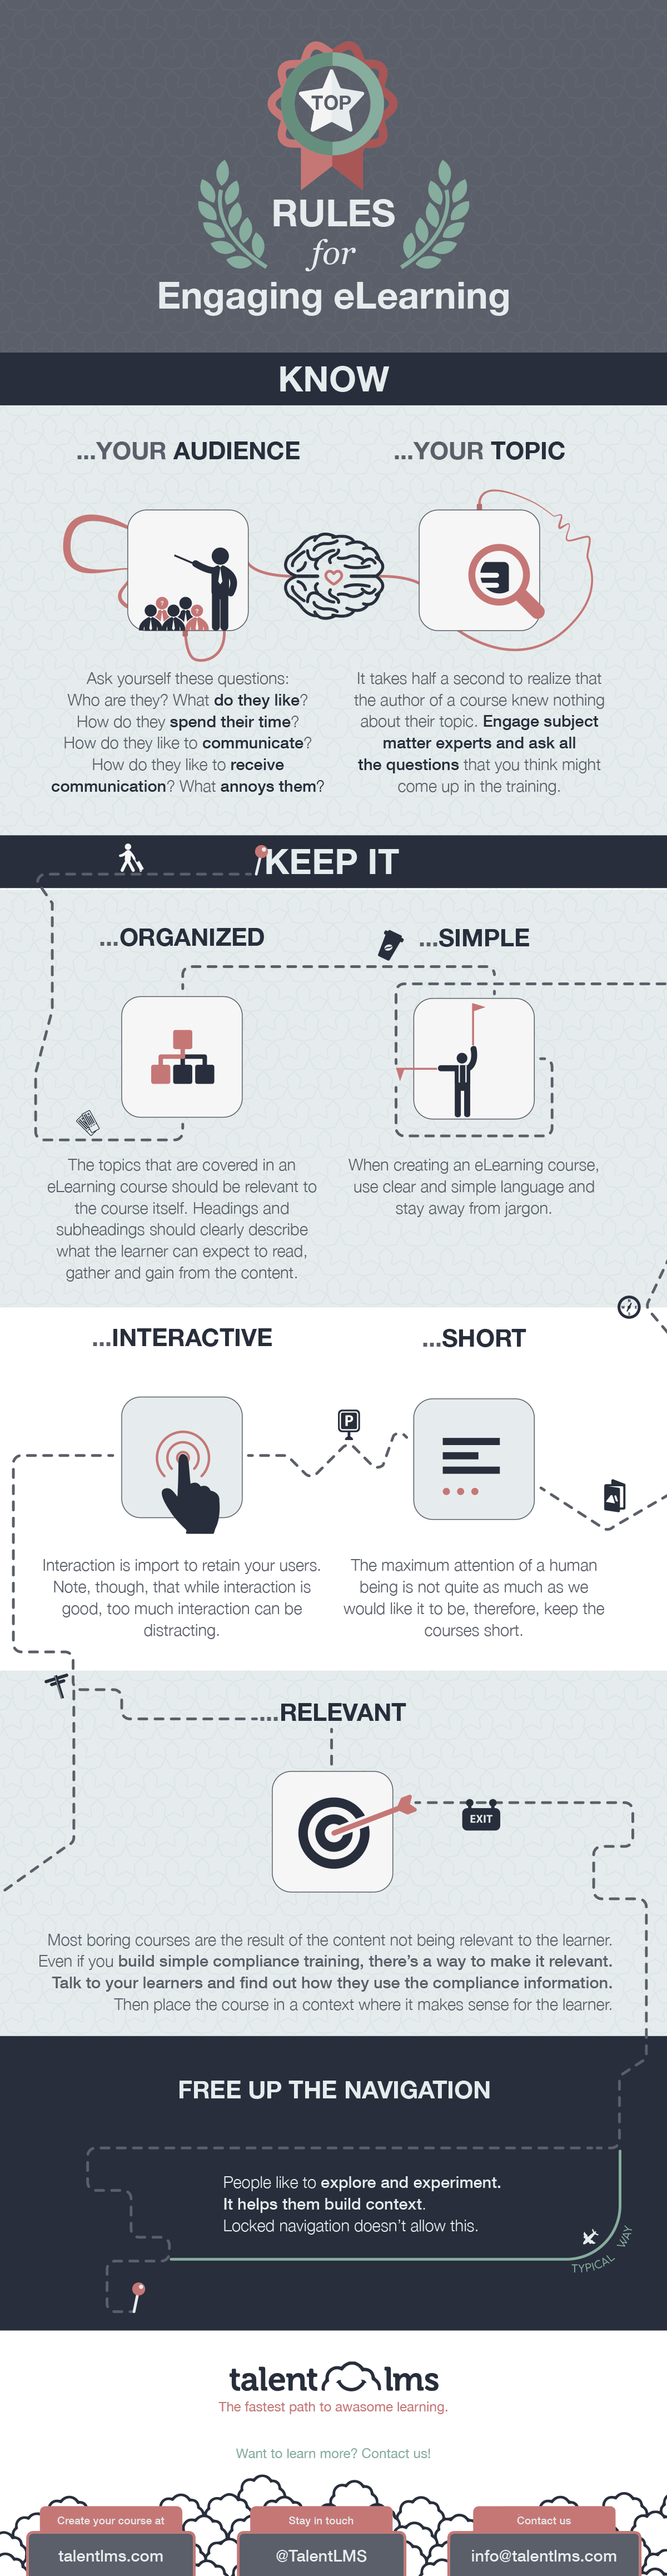 e-learning Infographic: Rules for engaging elearning